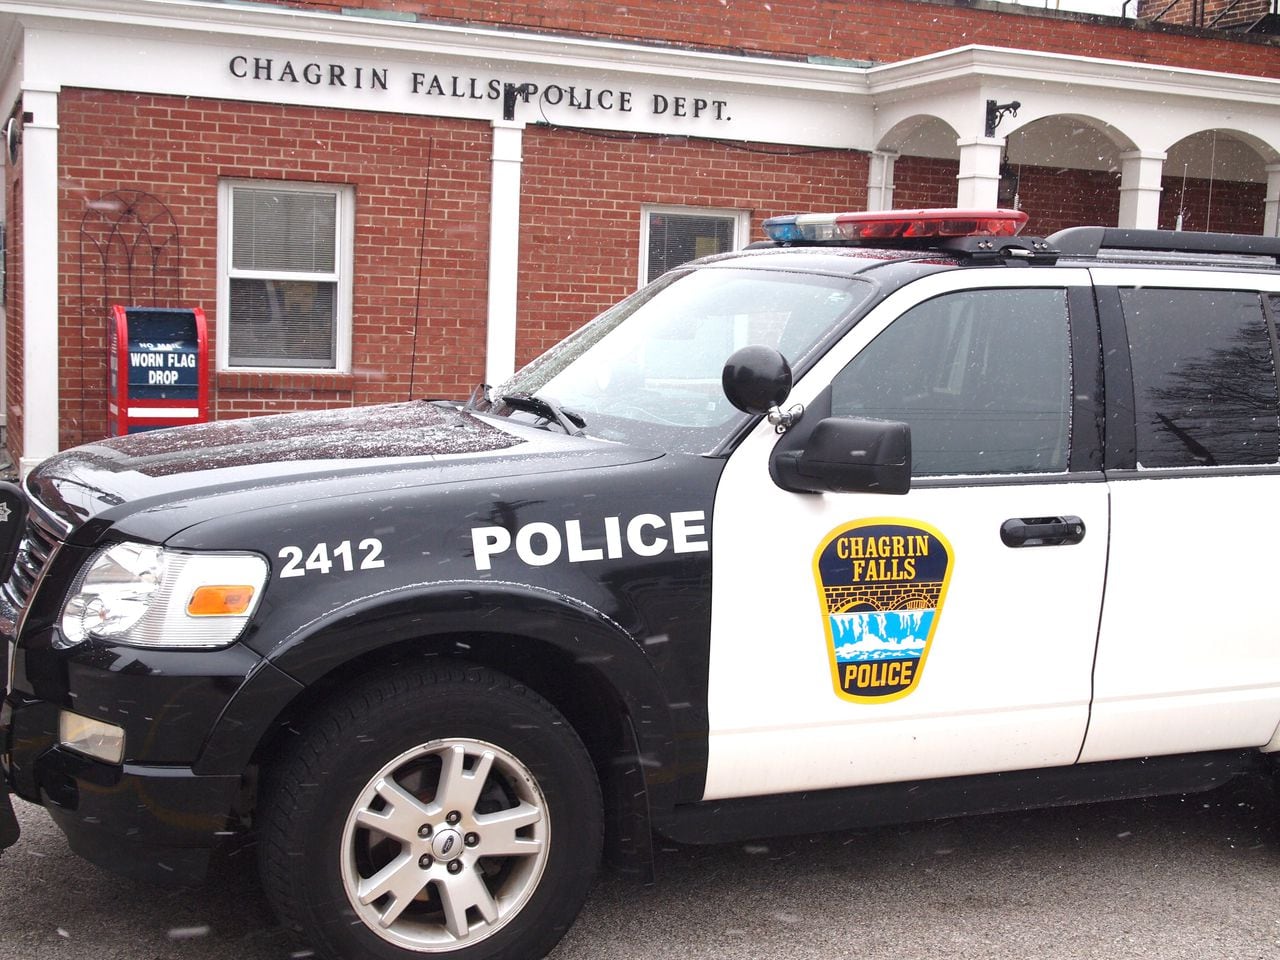  Woman falls into flower box in front of coffee shop: Chagrin Falls Police Blotter 